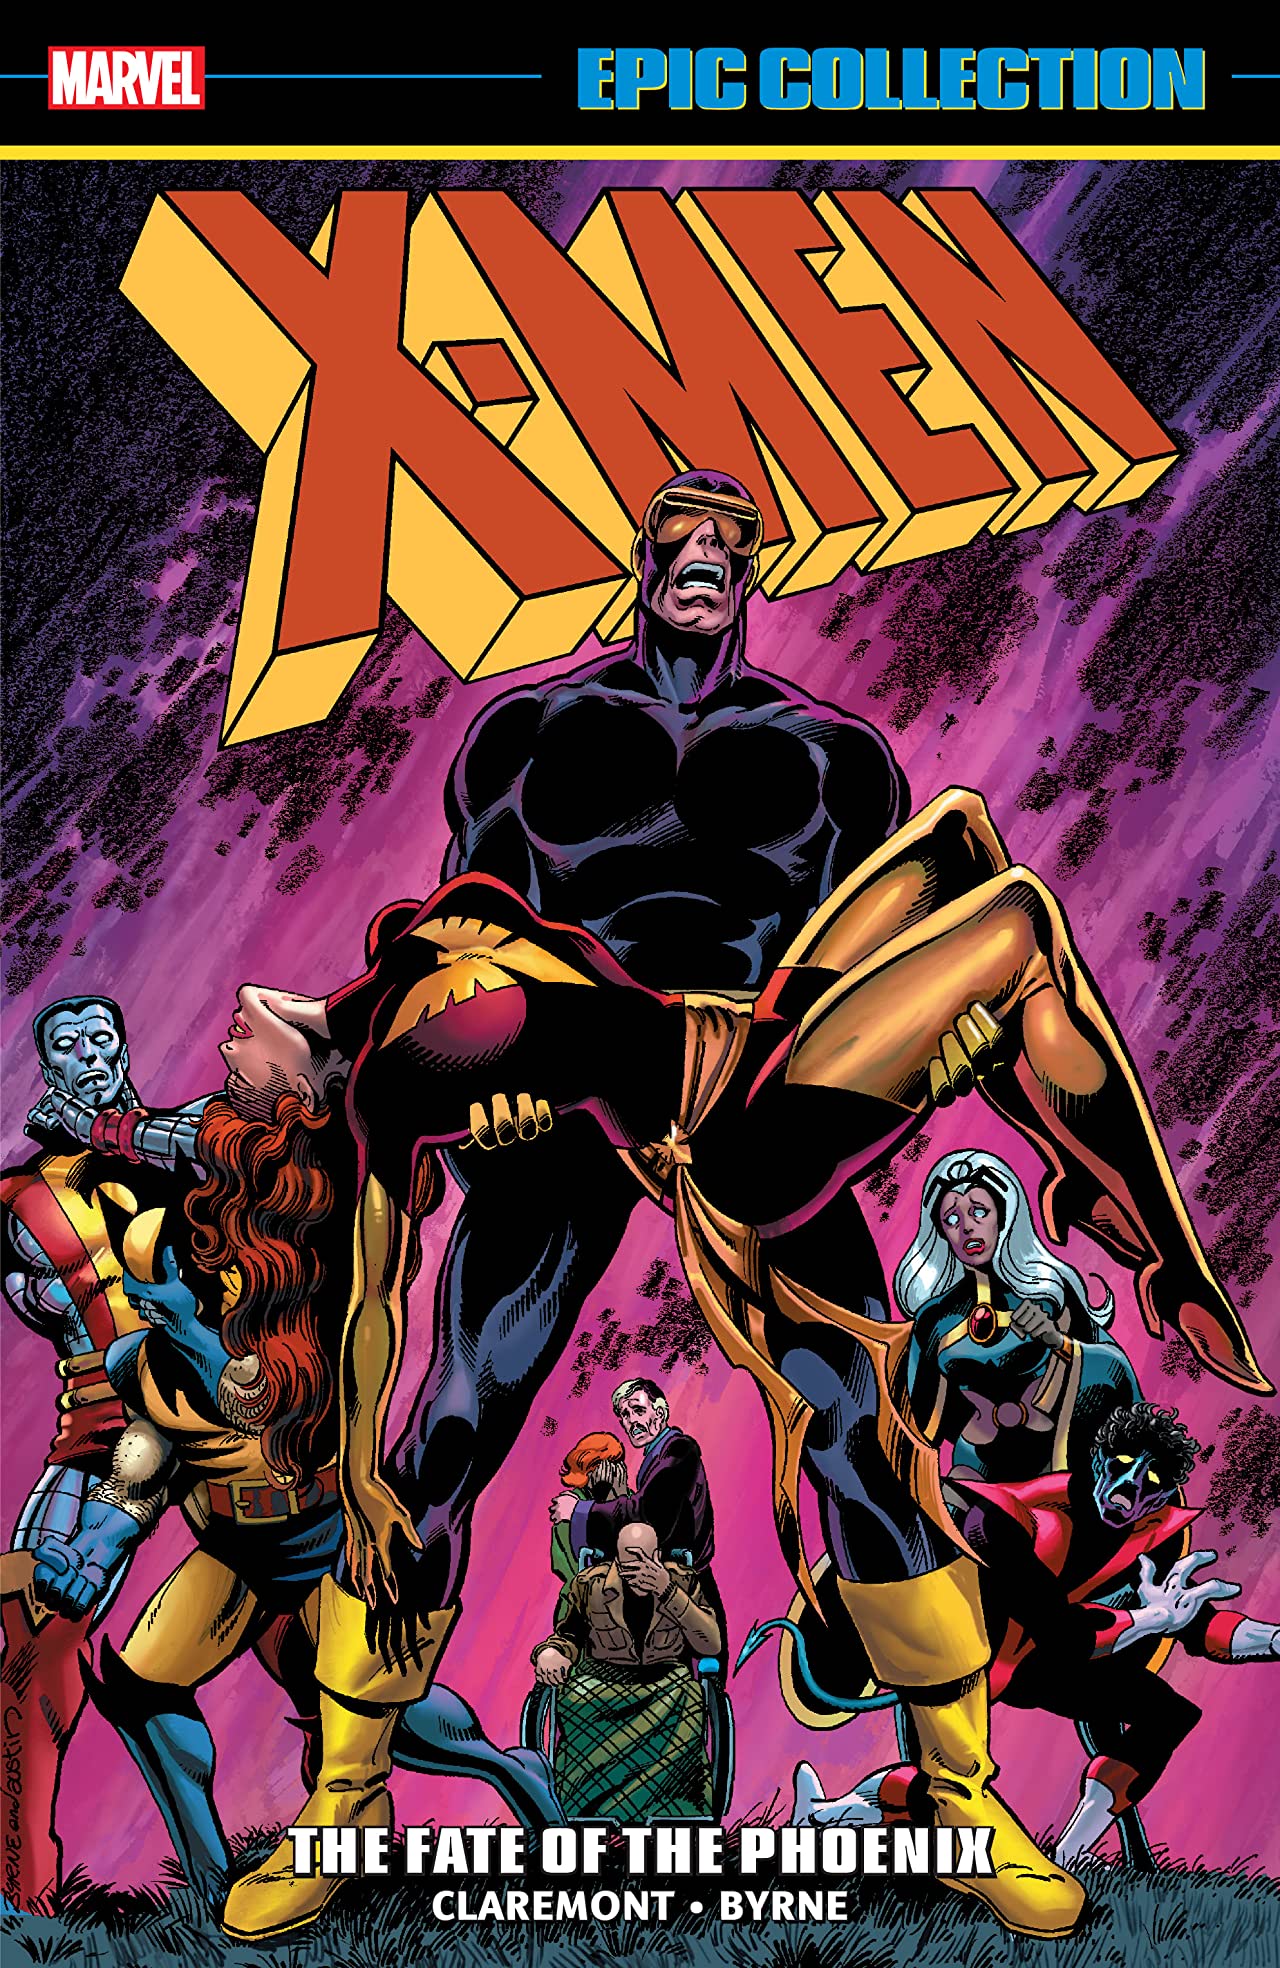 X-Men Epic Collection Graphic Novel Volume 7 Fate of the Phoenix